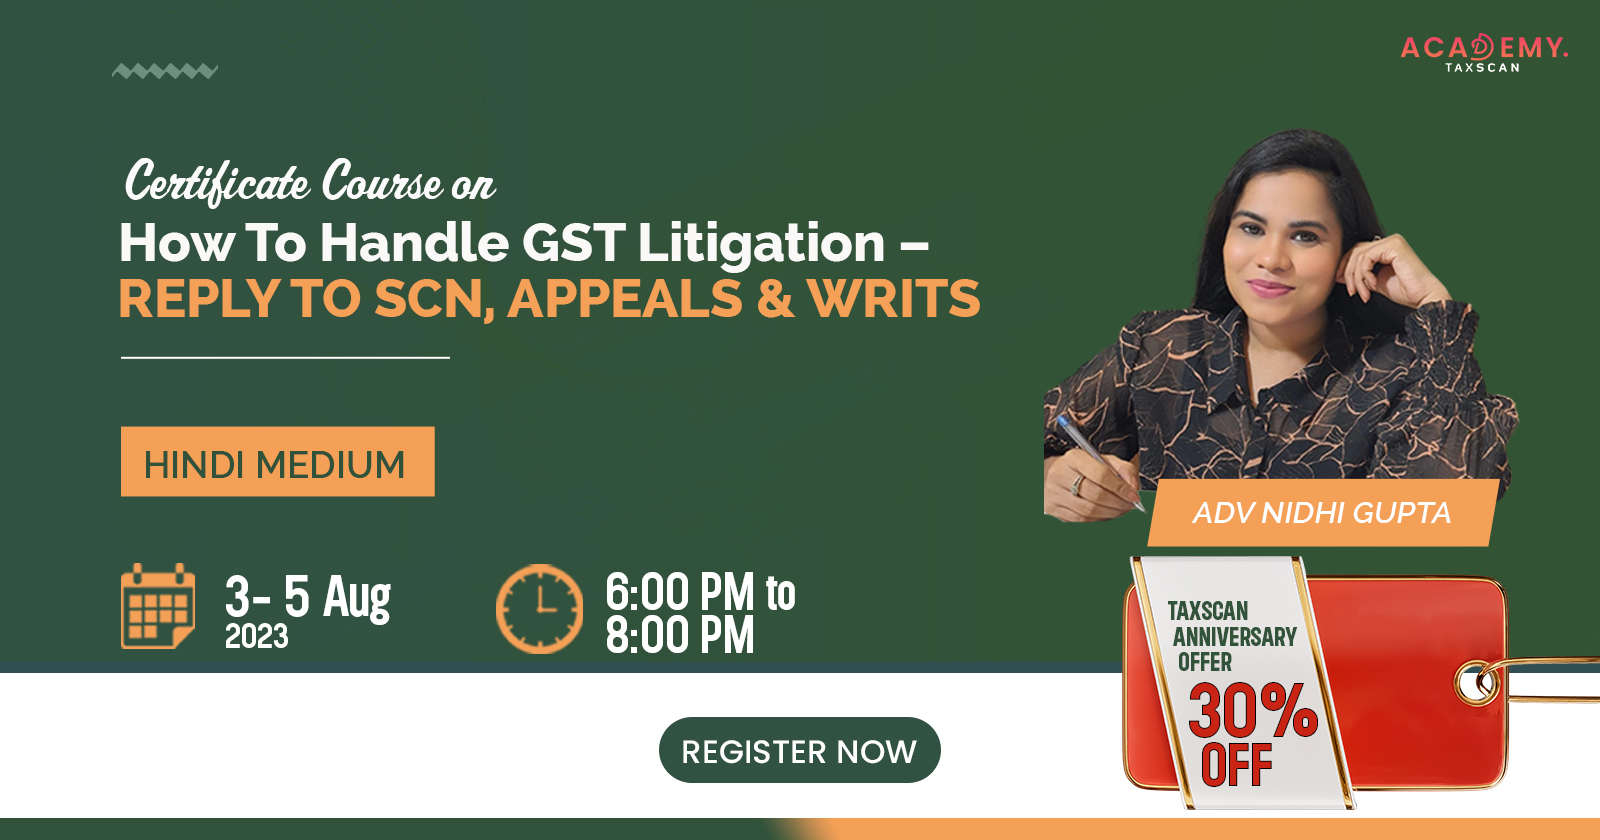 Certificate Course - How To Handle GST Litigation - GST Litigation - GST - SCN - Litigation - online certificate course - certificate course 2023 - Taxscan Academy - taxscan